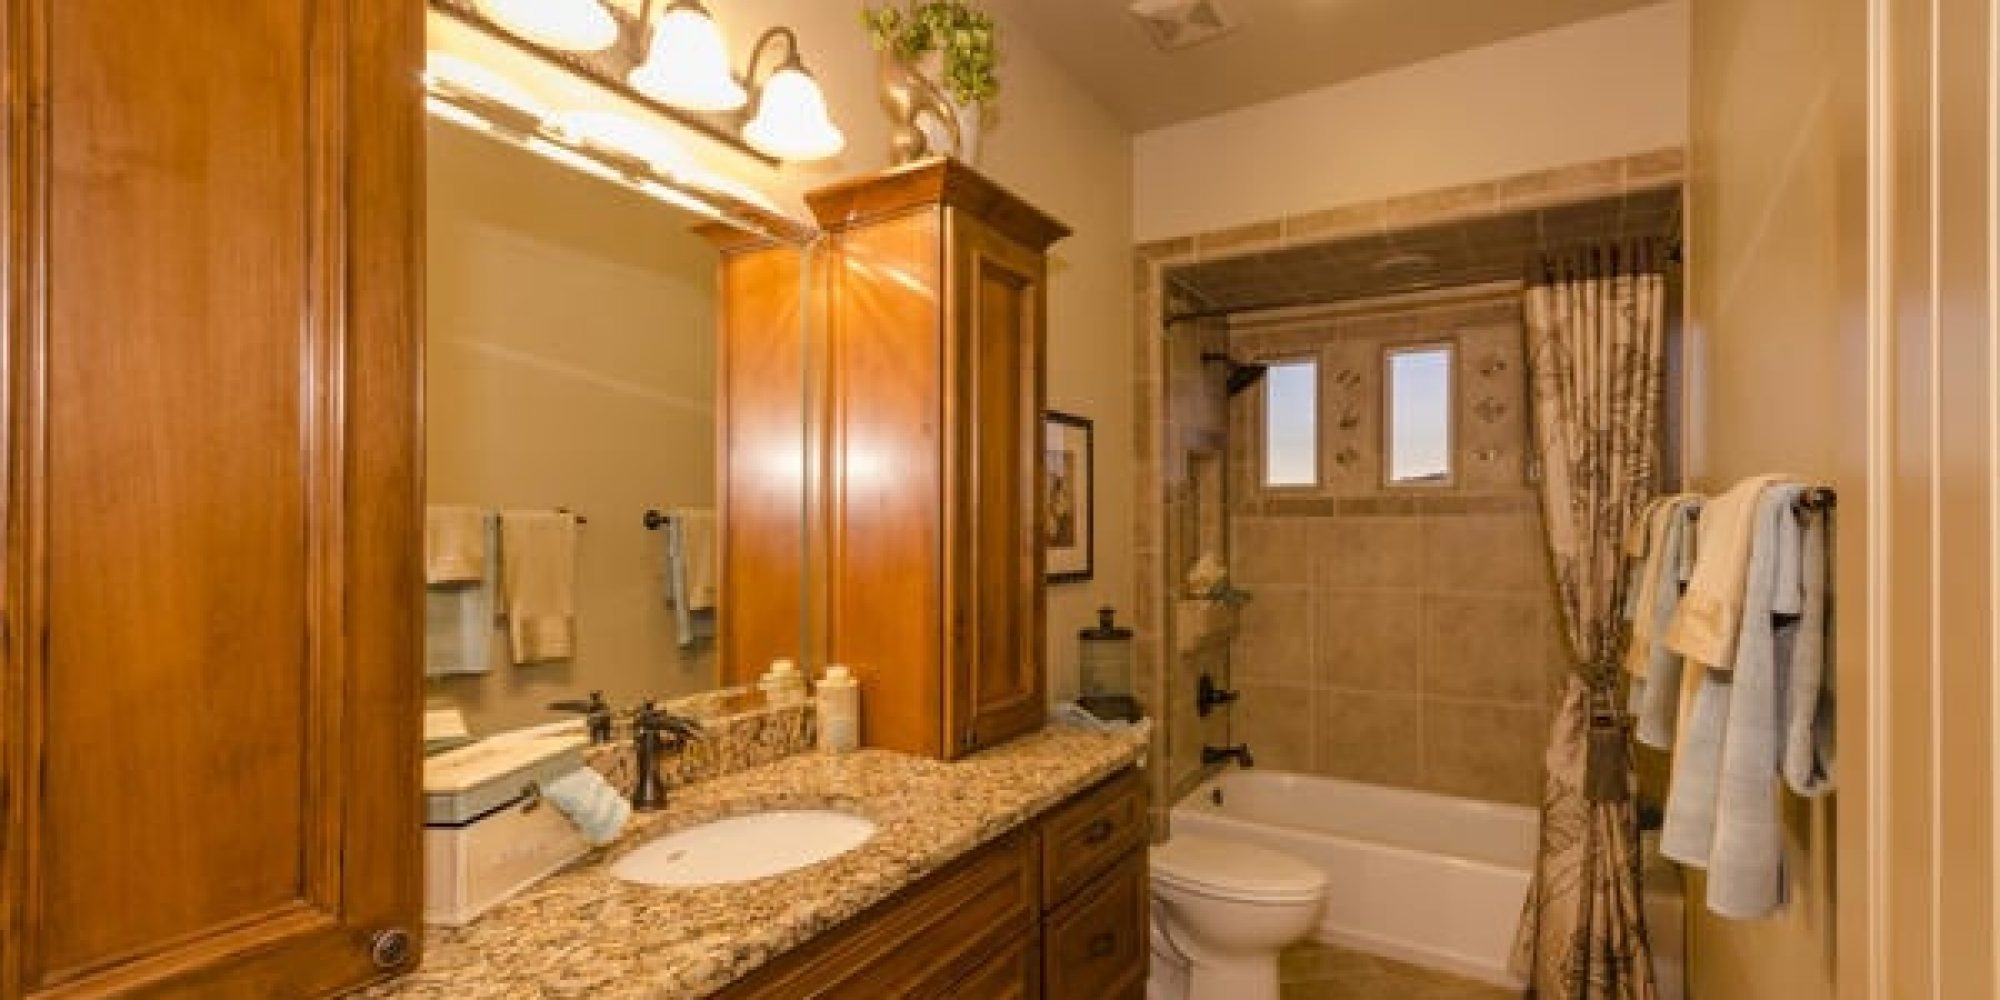 a newly remodeled bathroom with bright lights and oak cabinets